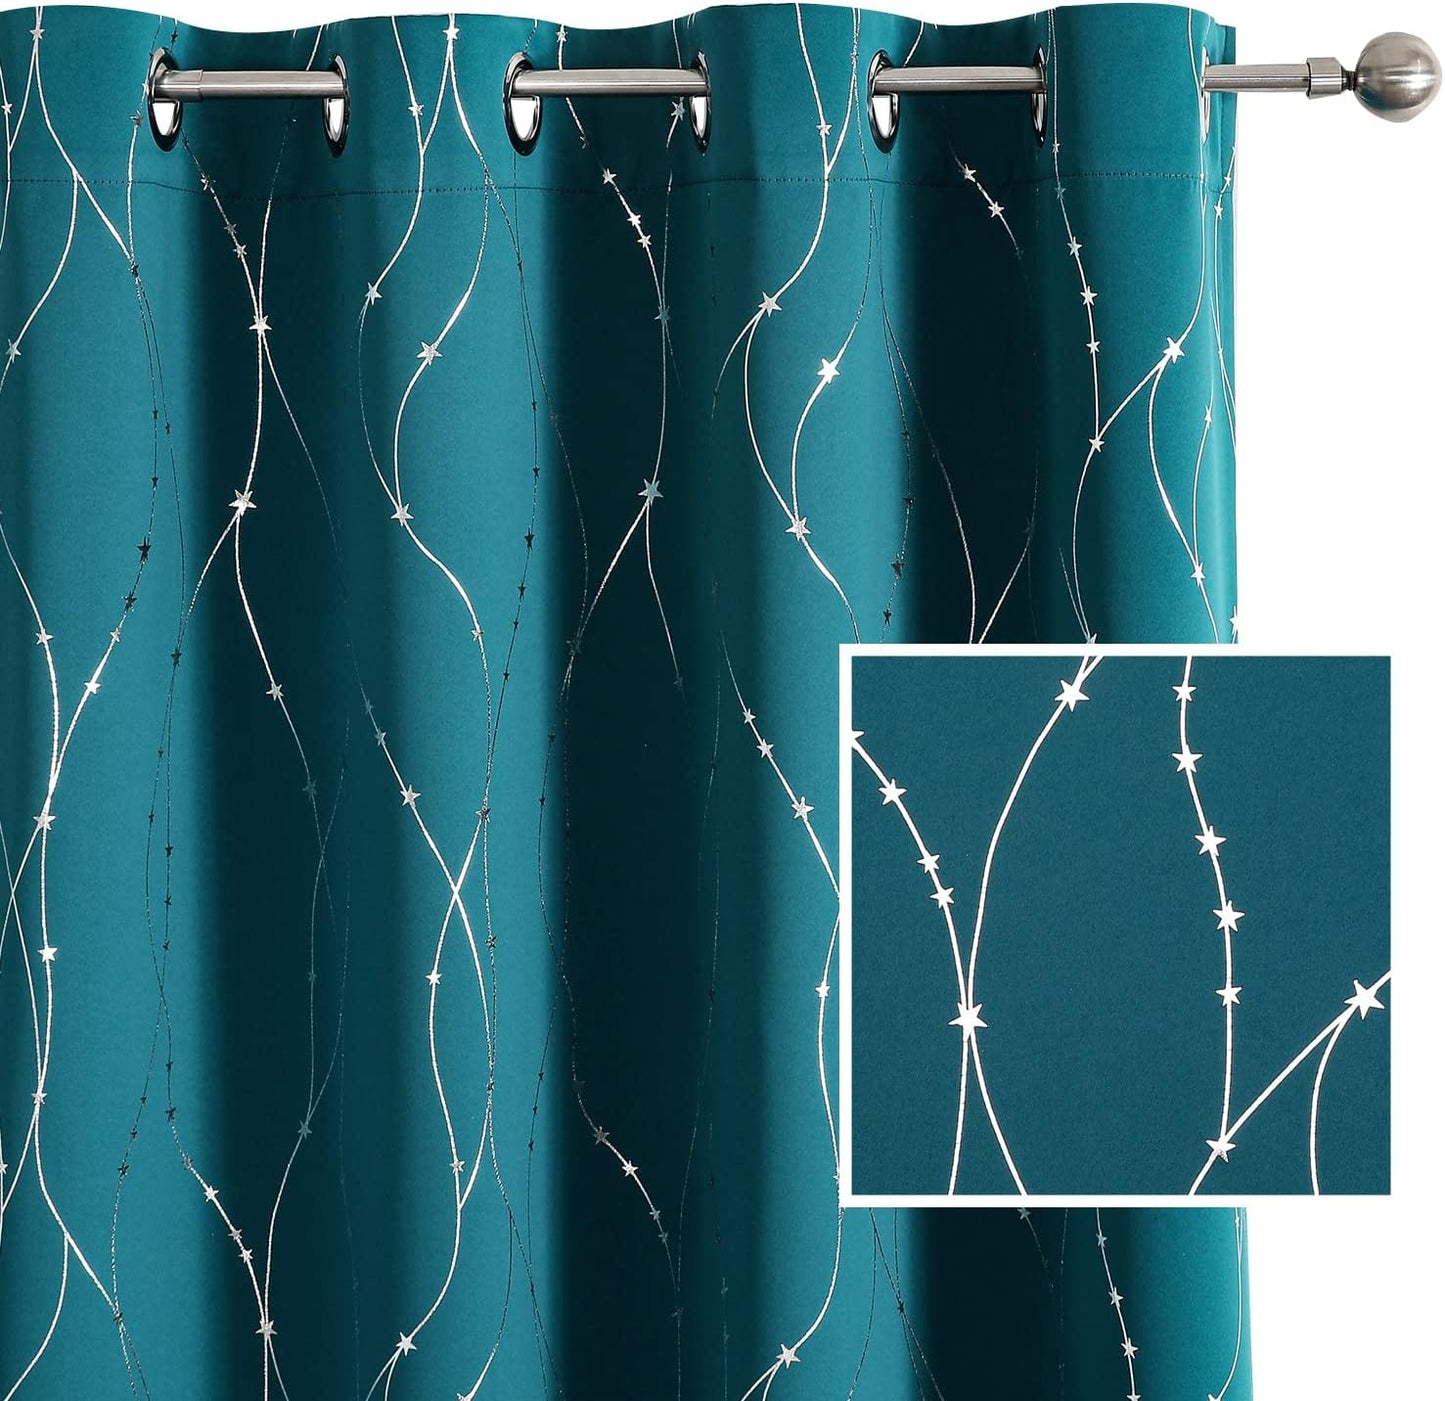 SMILE WEAVER Black Blackout Curtains for Bedroom 72 Inch Long 2 Panels,Room Darkening Curtain with Gold Print Design Noise Reducing Thermal Insulated Window Treatment Drapes for Living Room  SMILE WEAVER Peacock Blue Silver 52Wx96L 